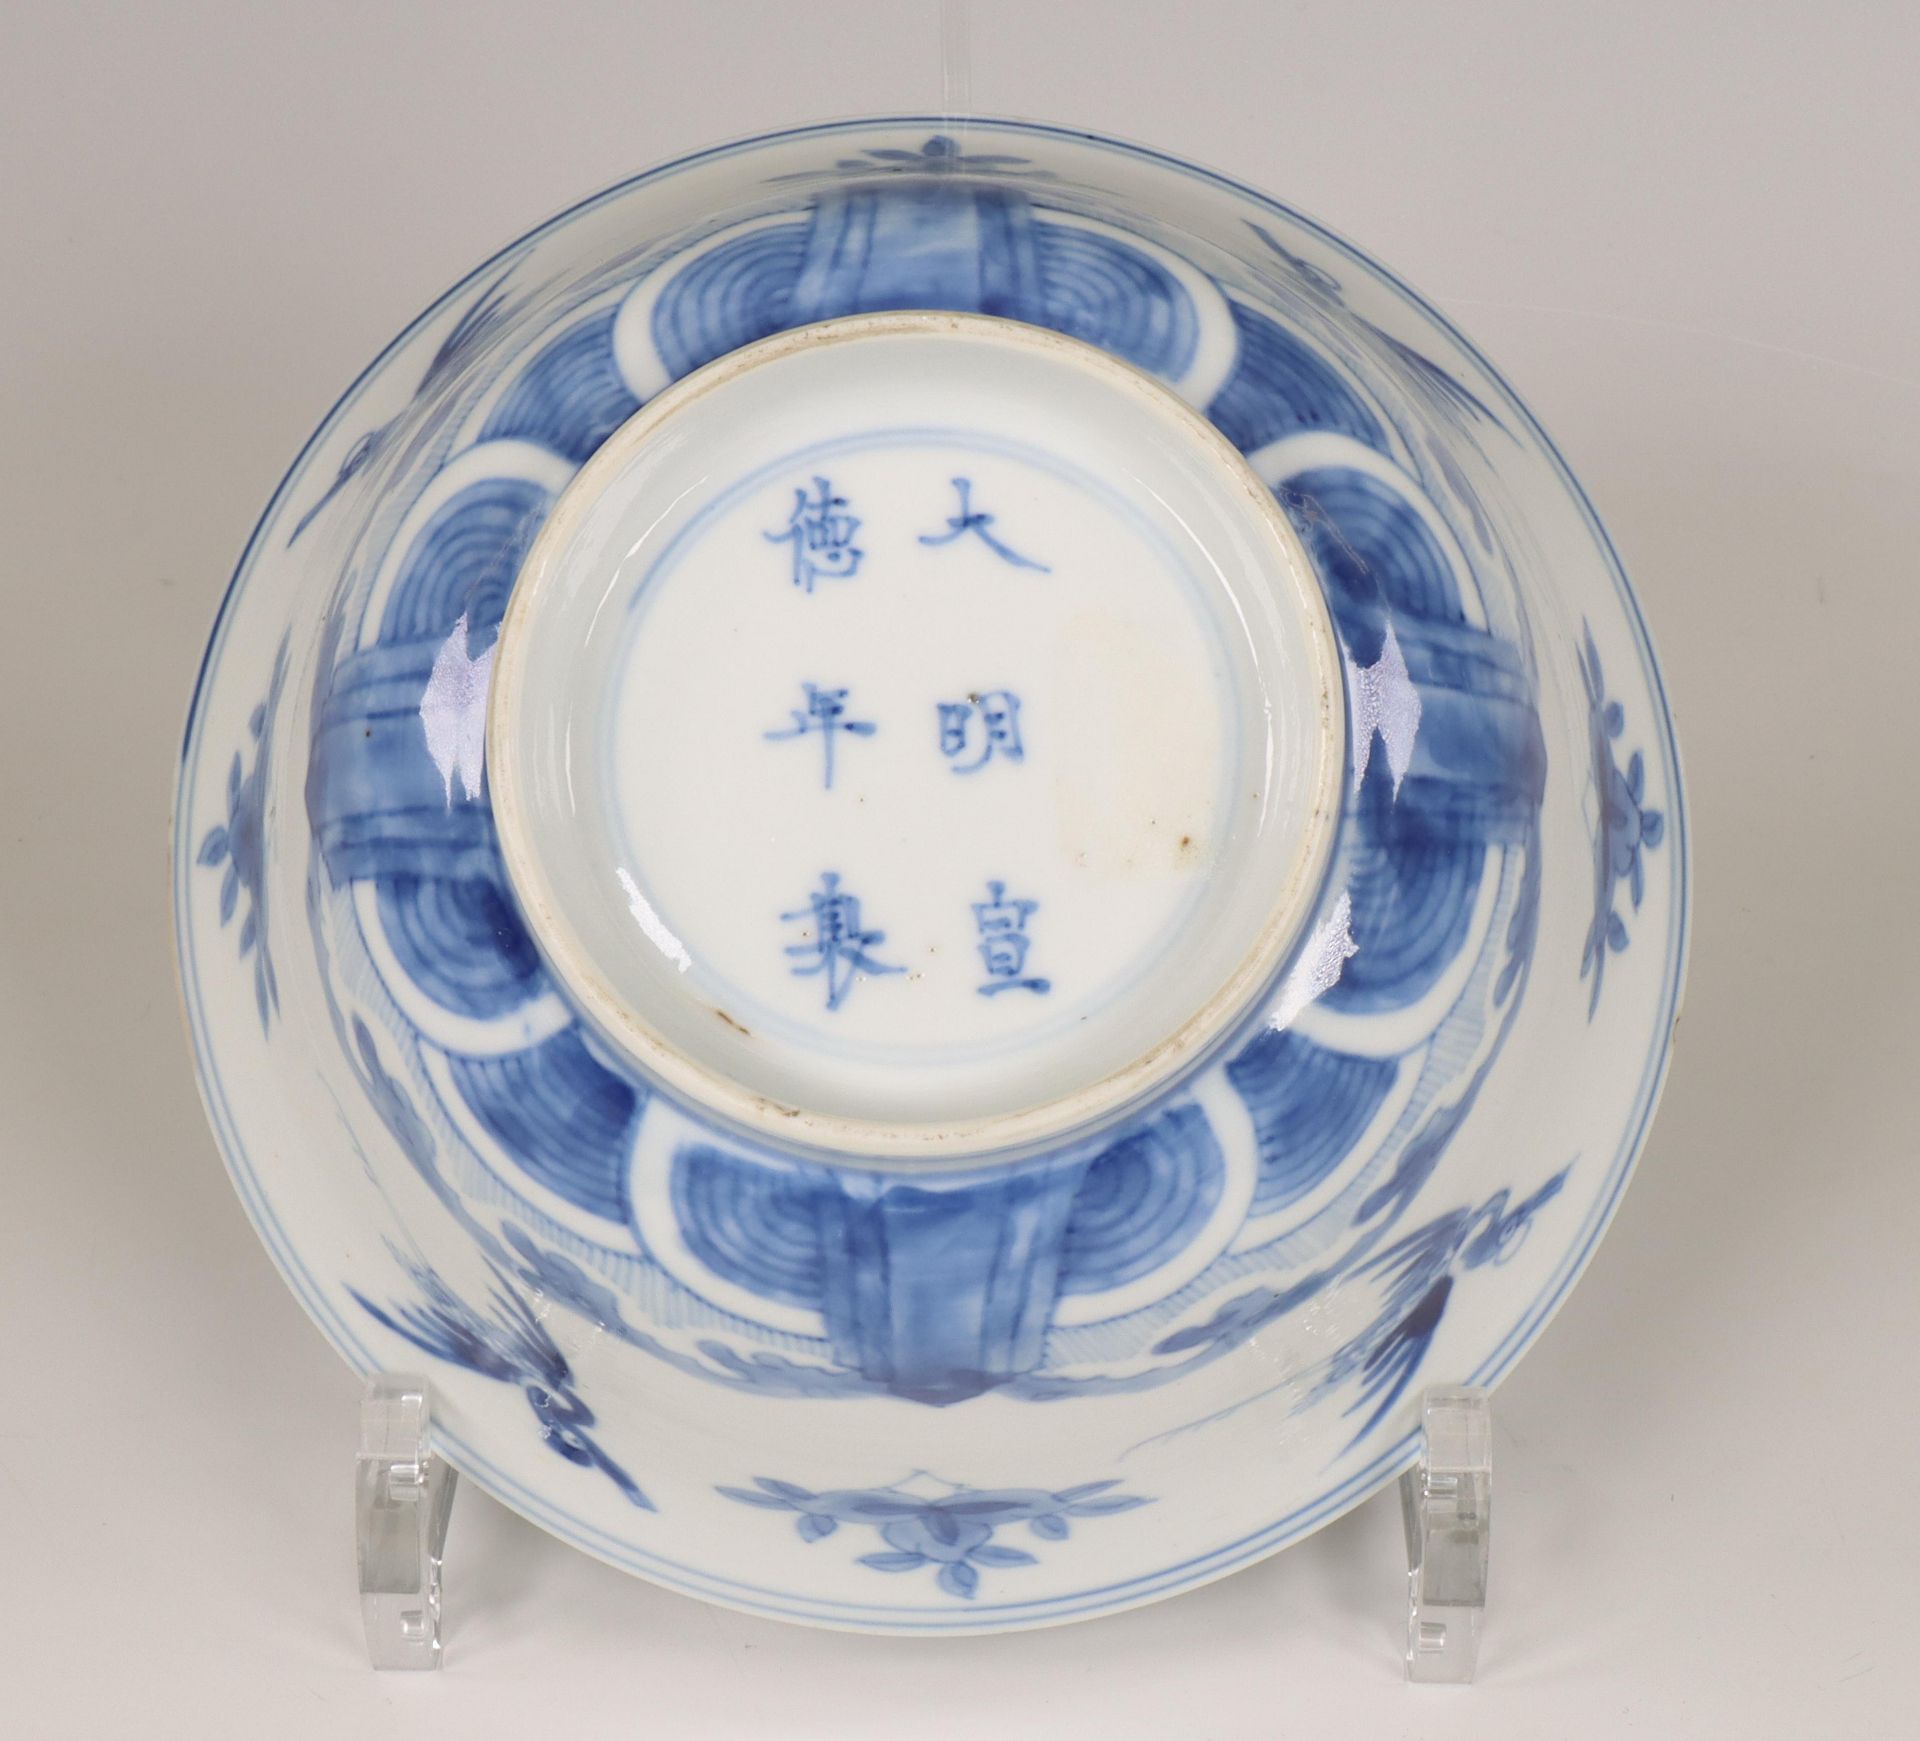 China, a blue and white porcelain bowl, Kangxi period (1662-1722), - Image 5 of 7